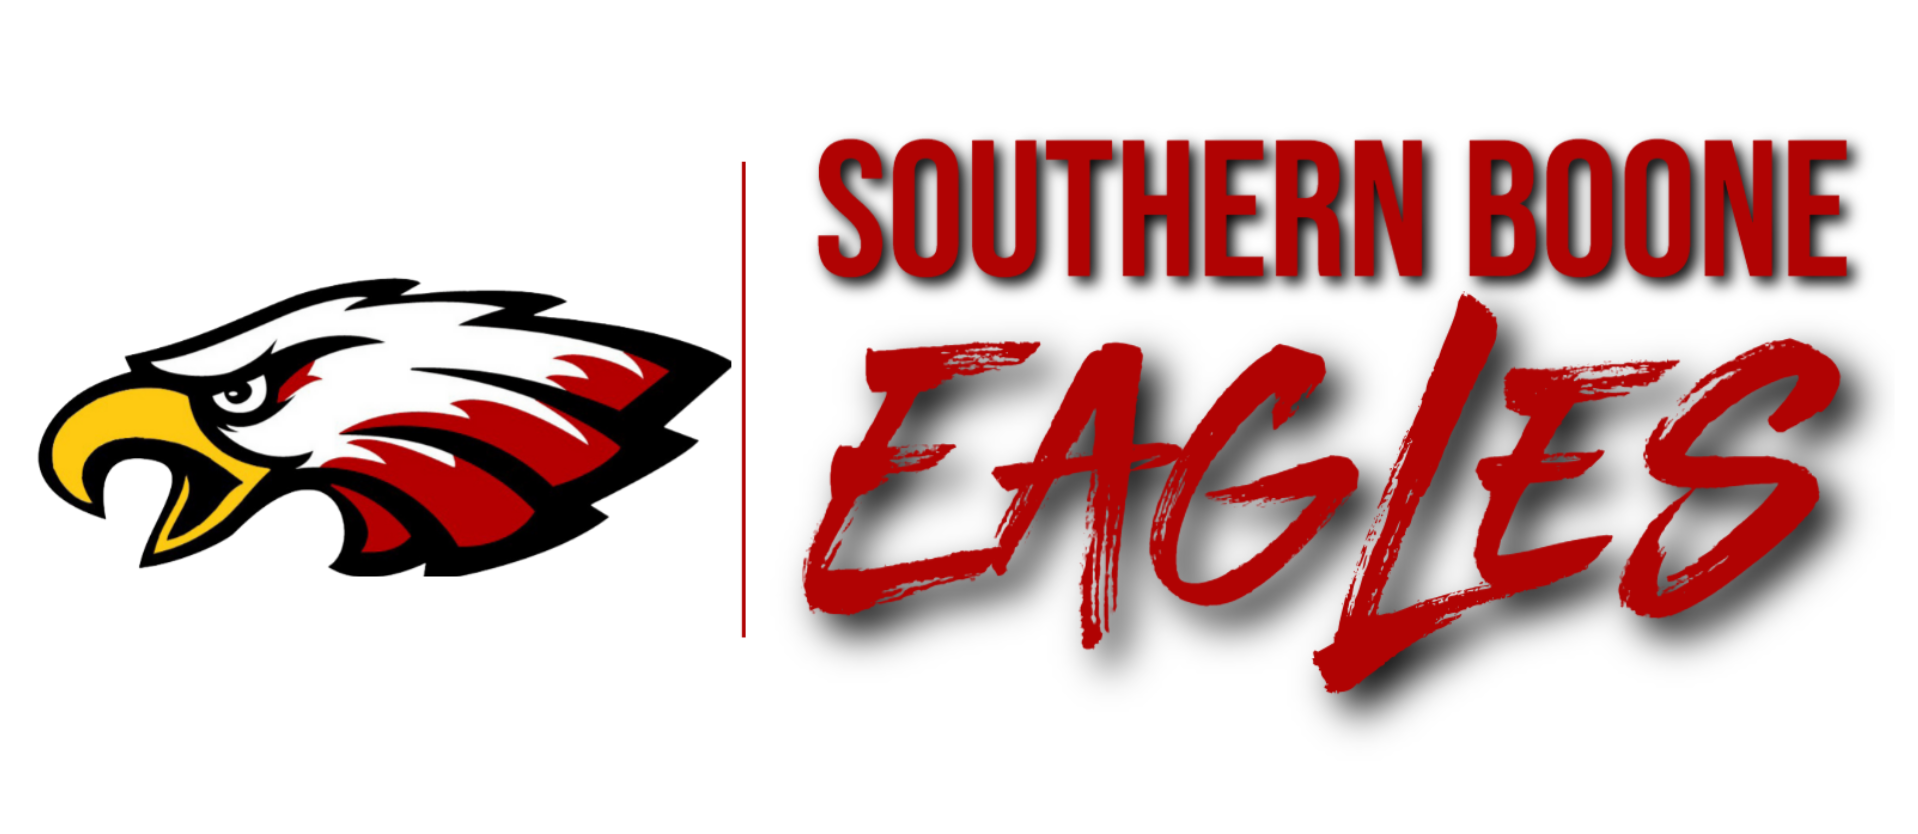 Southern Boone Eagles